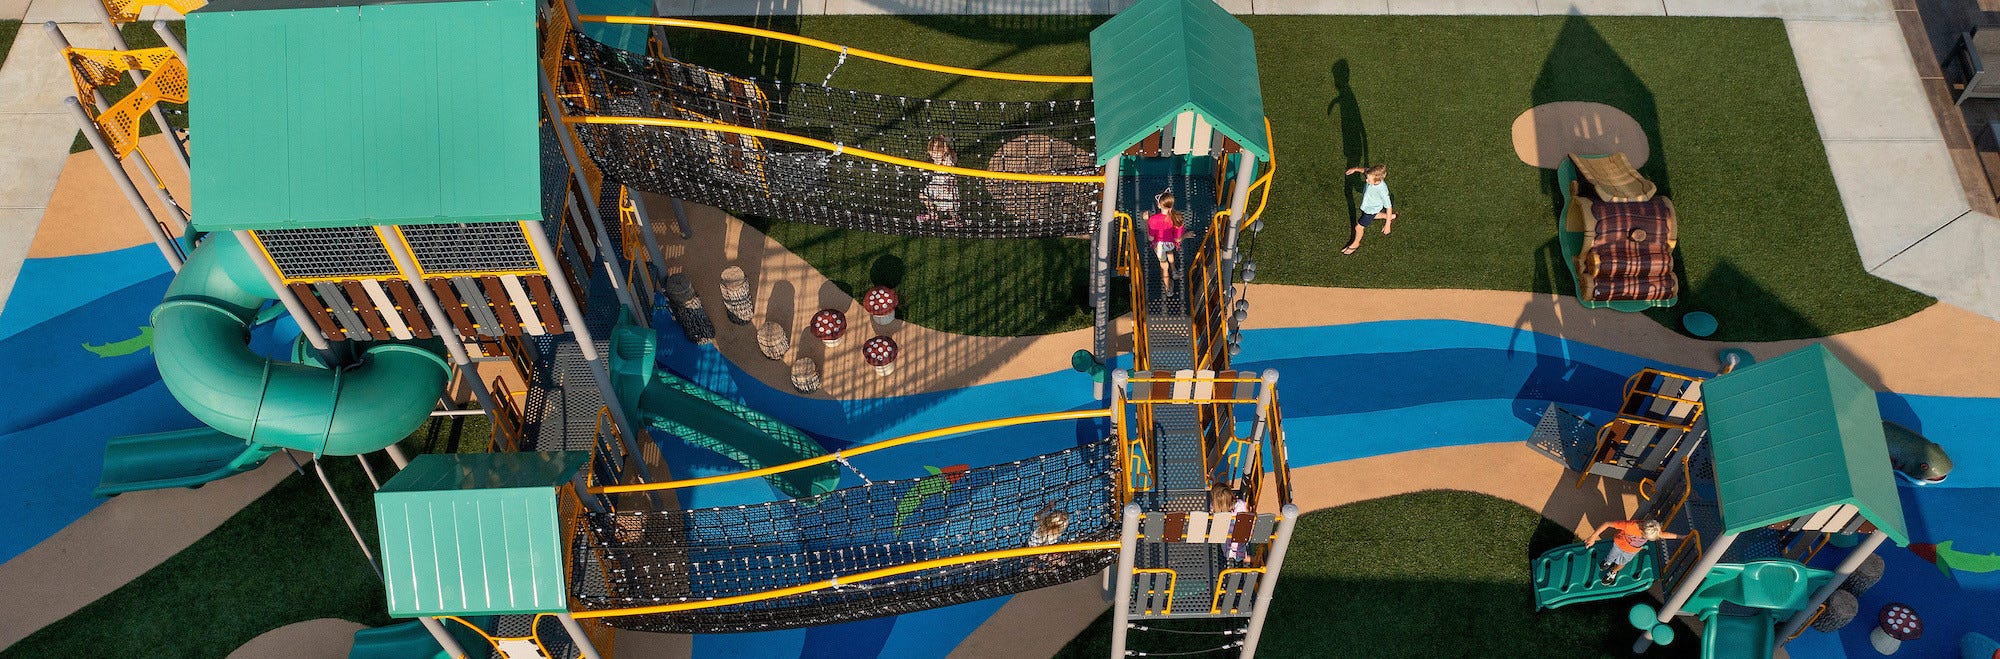 How to Build a Church Playground that Enhances the Community